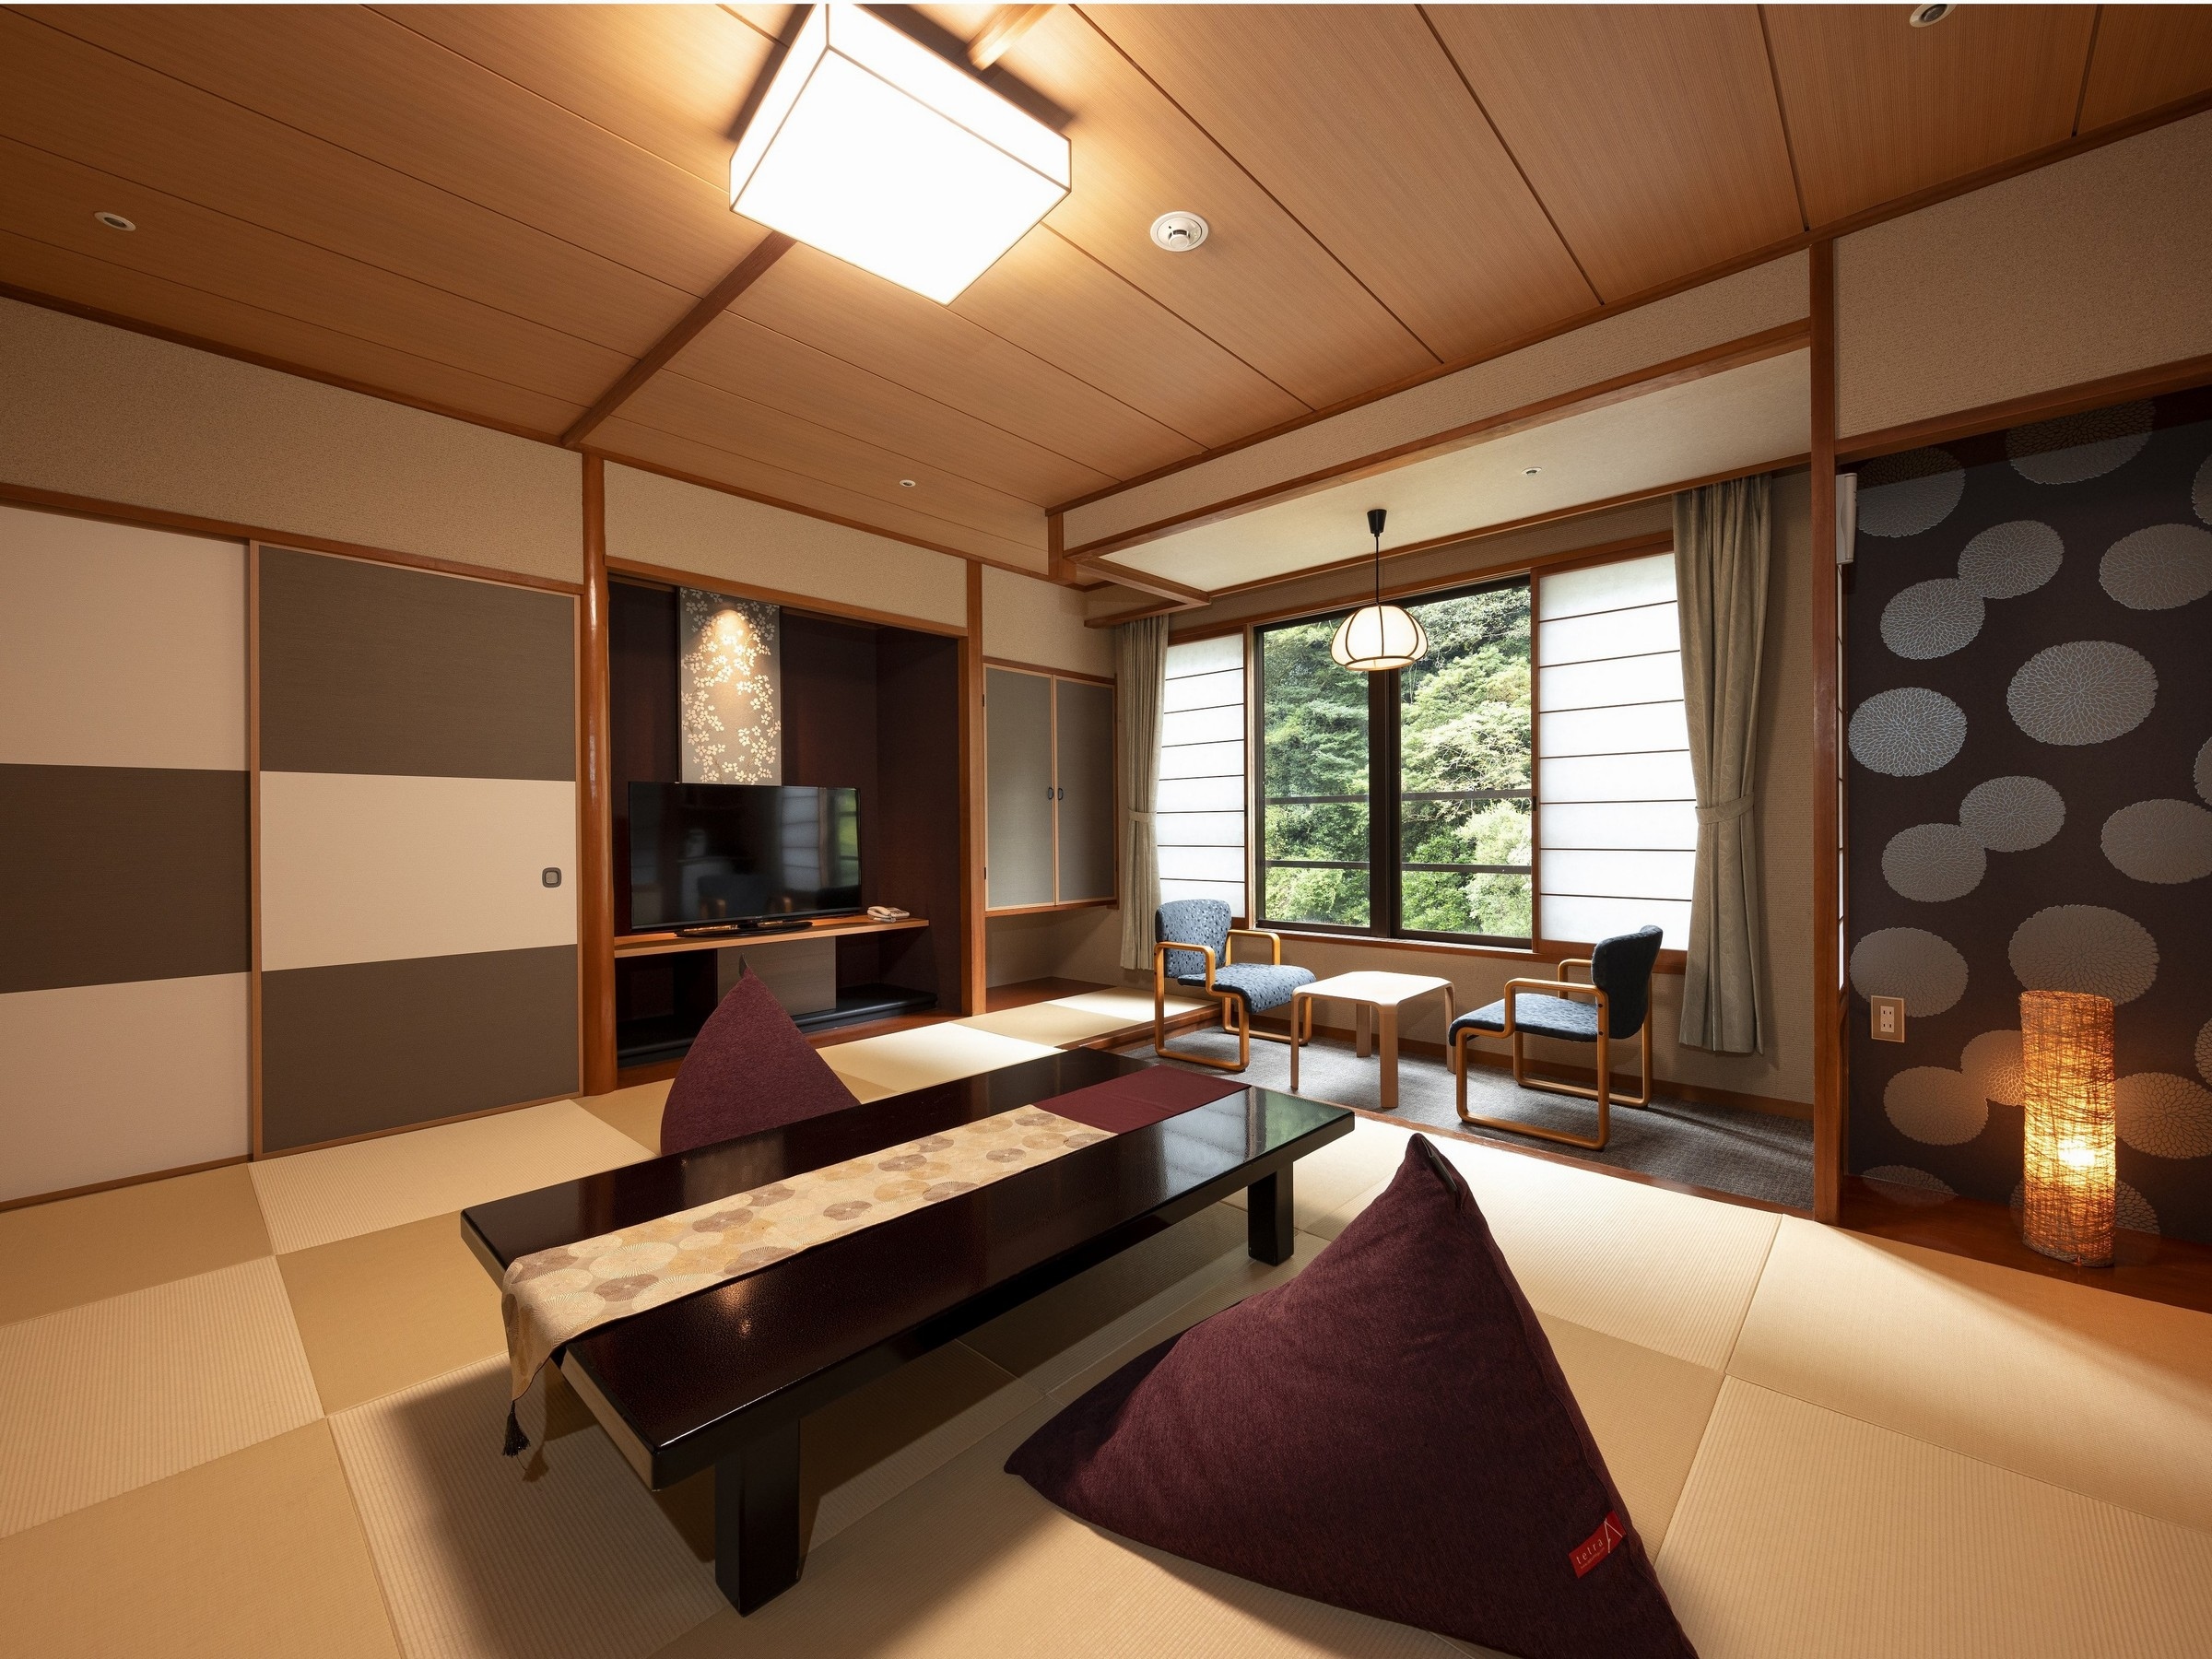 [An example of a renewed Japanese-style room] A new Japanese-style room where you can be healed by the fluffy bead cushions and the beauty of the mountain stream.